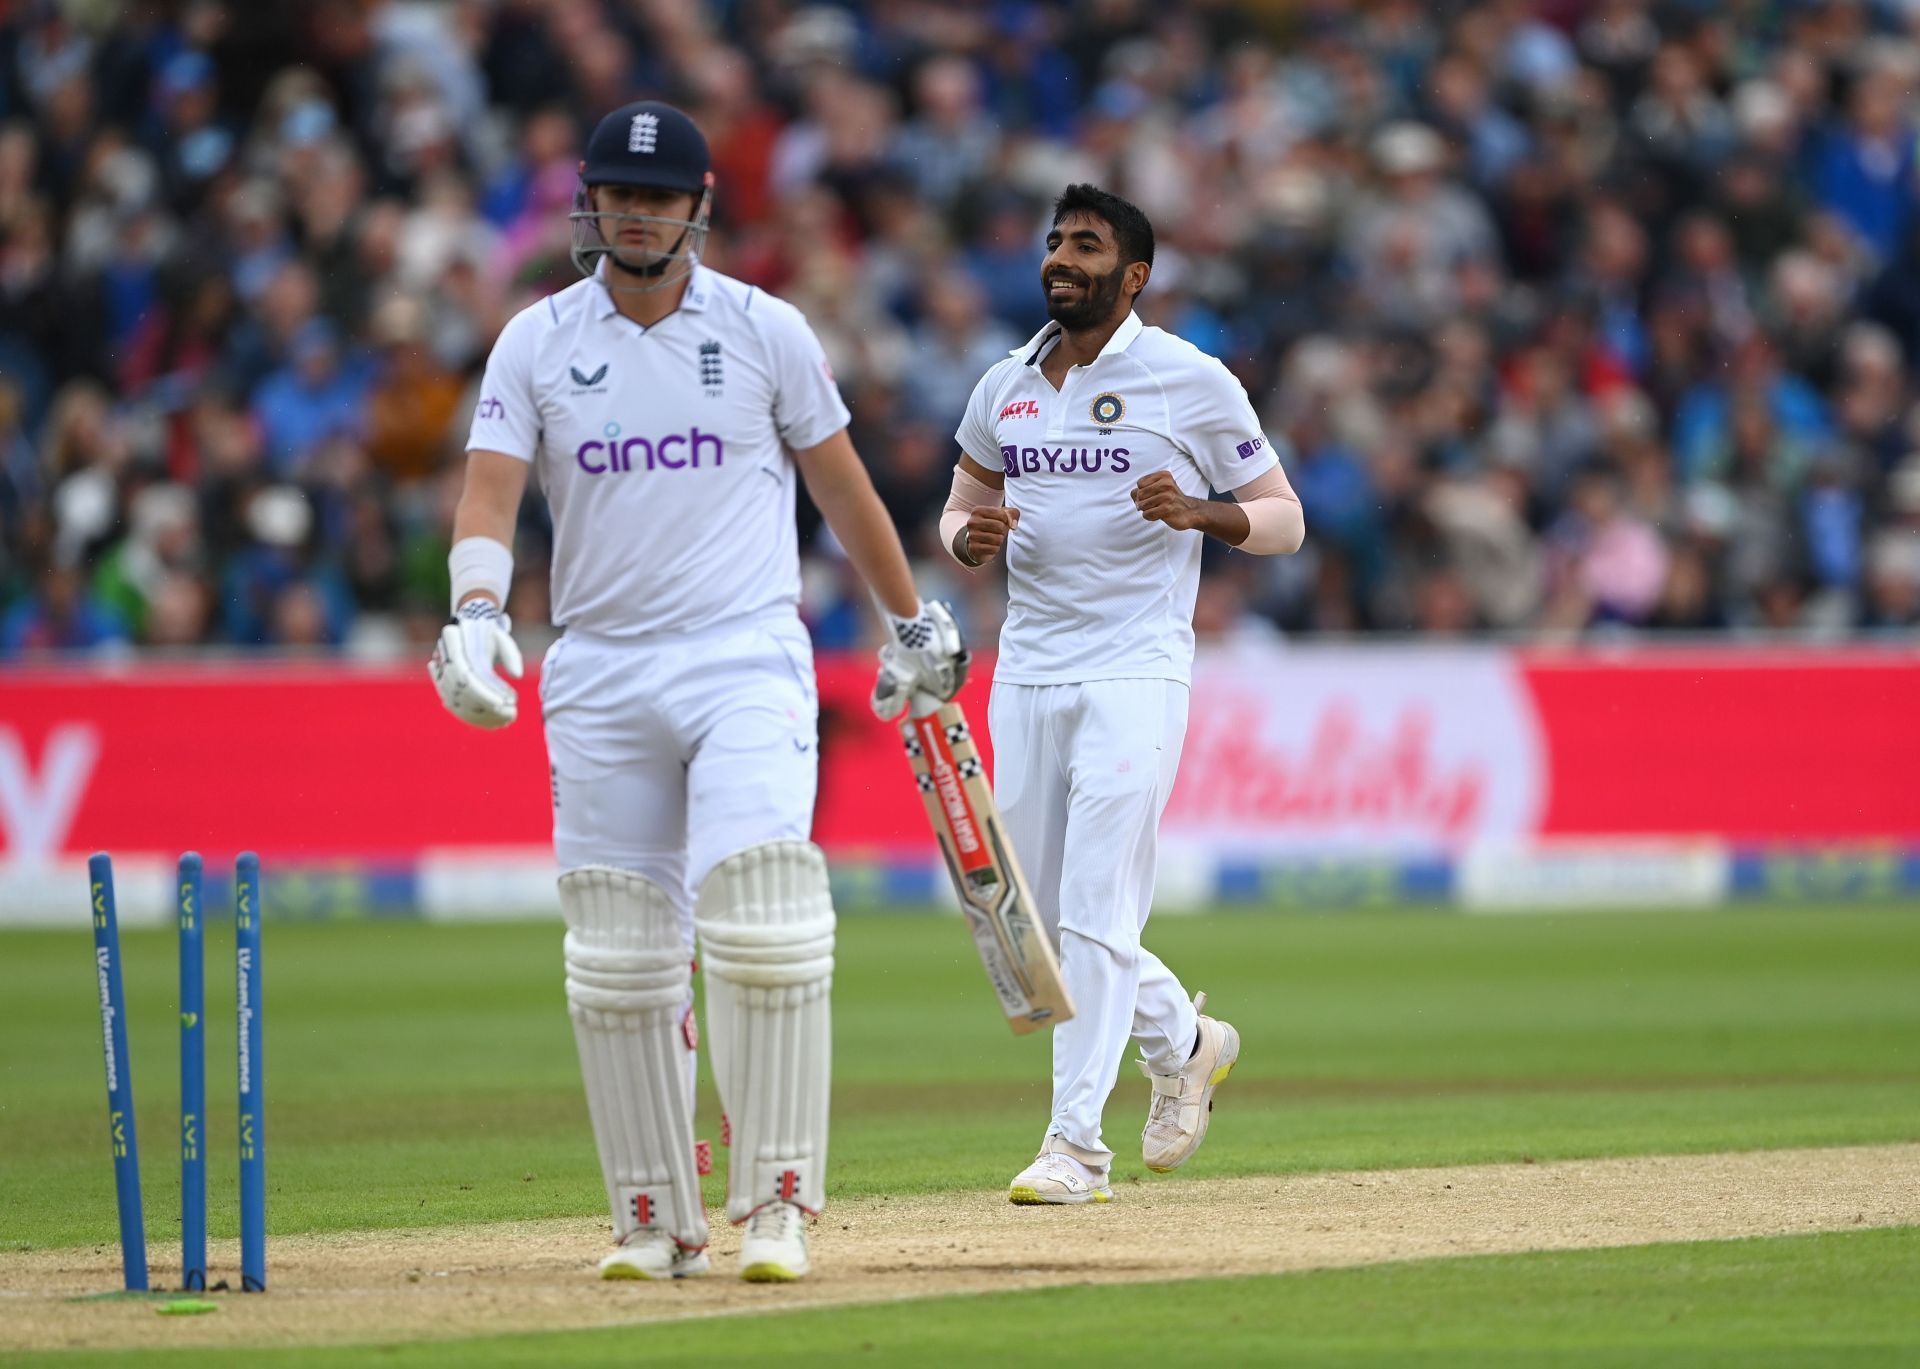 Jasprit Bumrah bowled a slightly fuller length at the start of the England innings